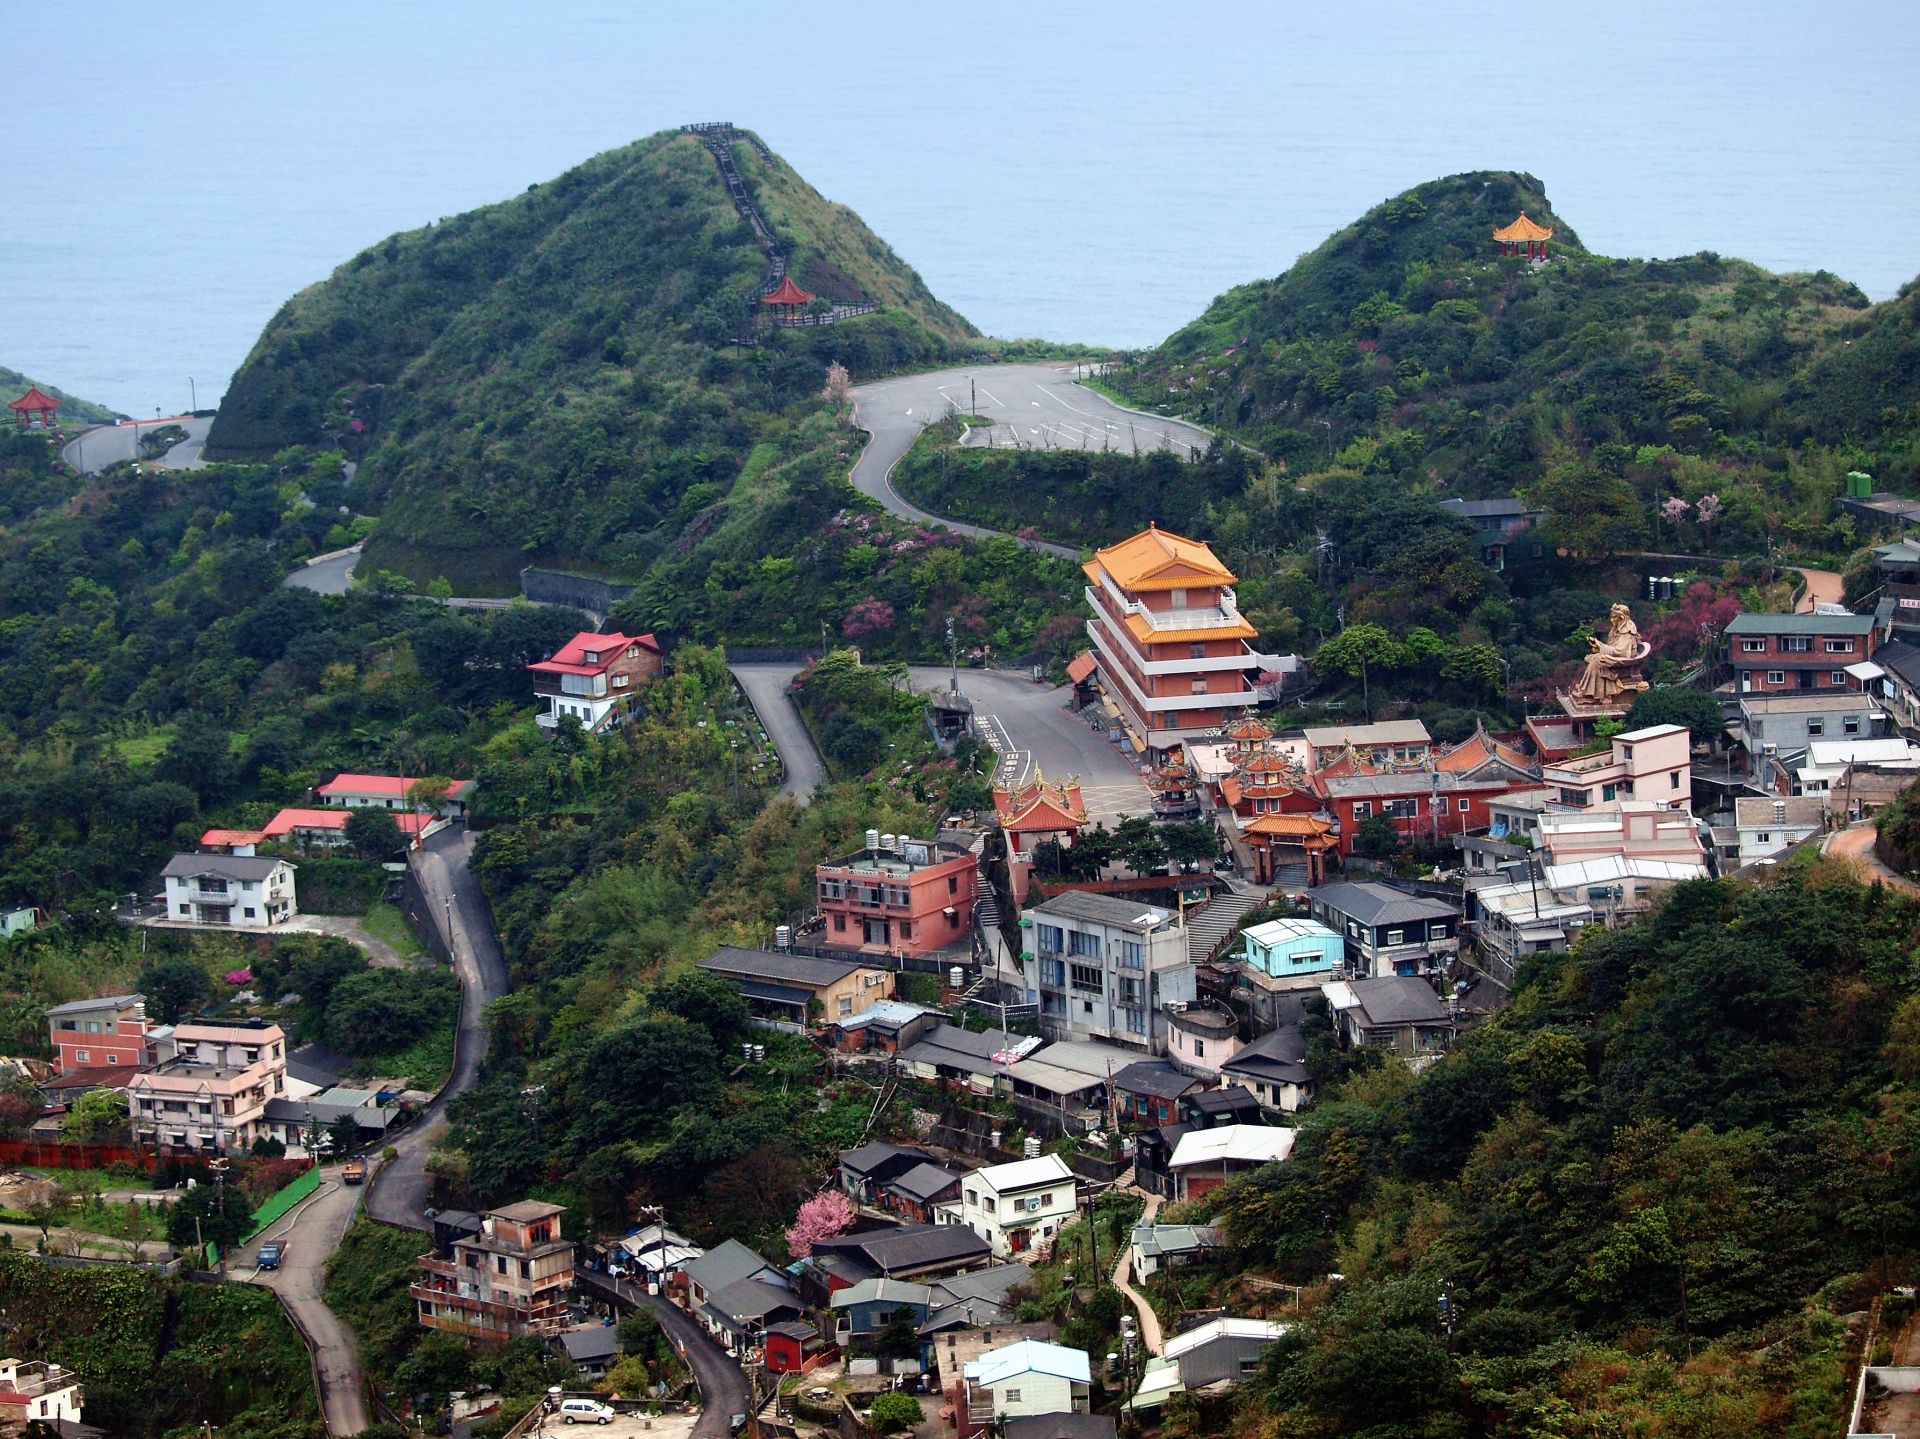 Aerial view of Jinguashi town, Ruifang district, on the north-east coast of Taiwan